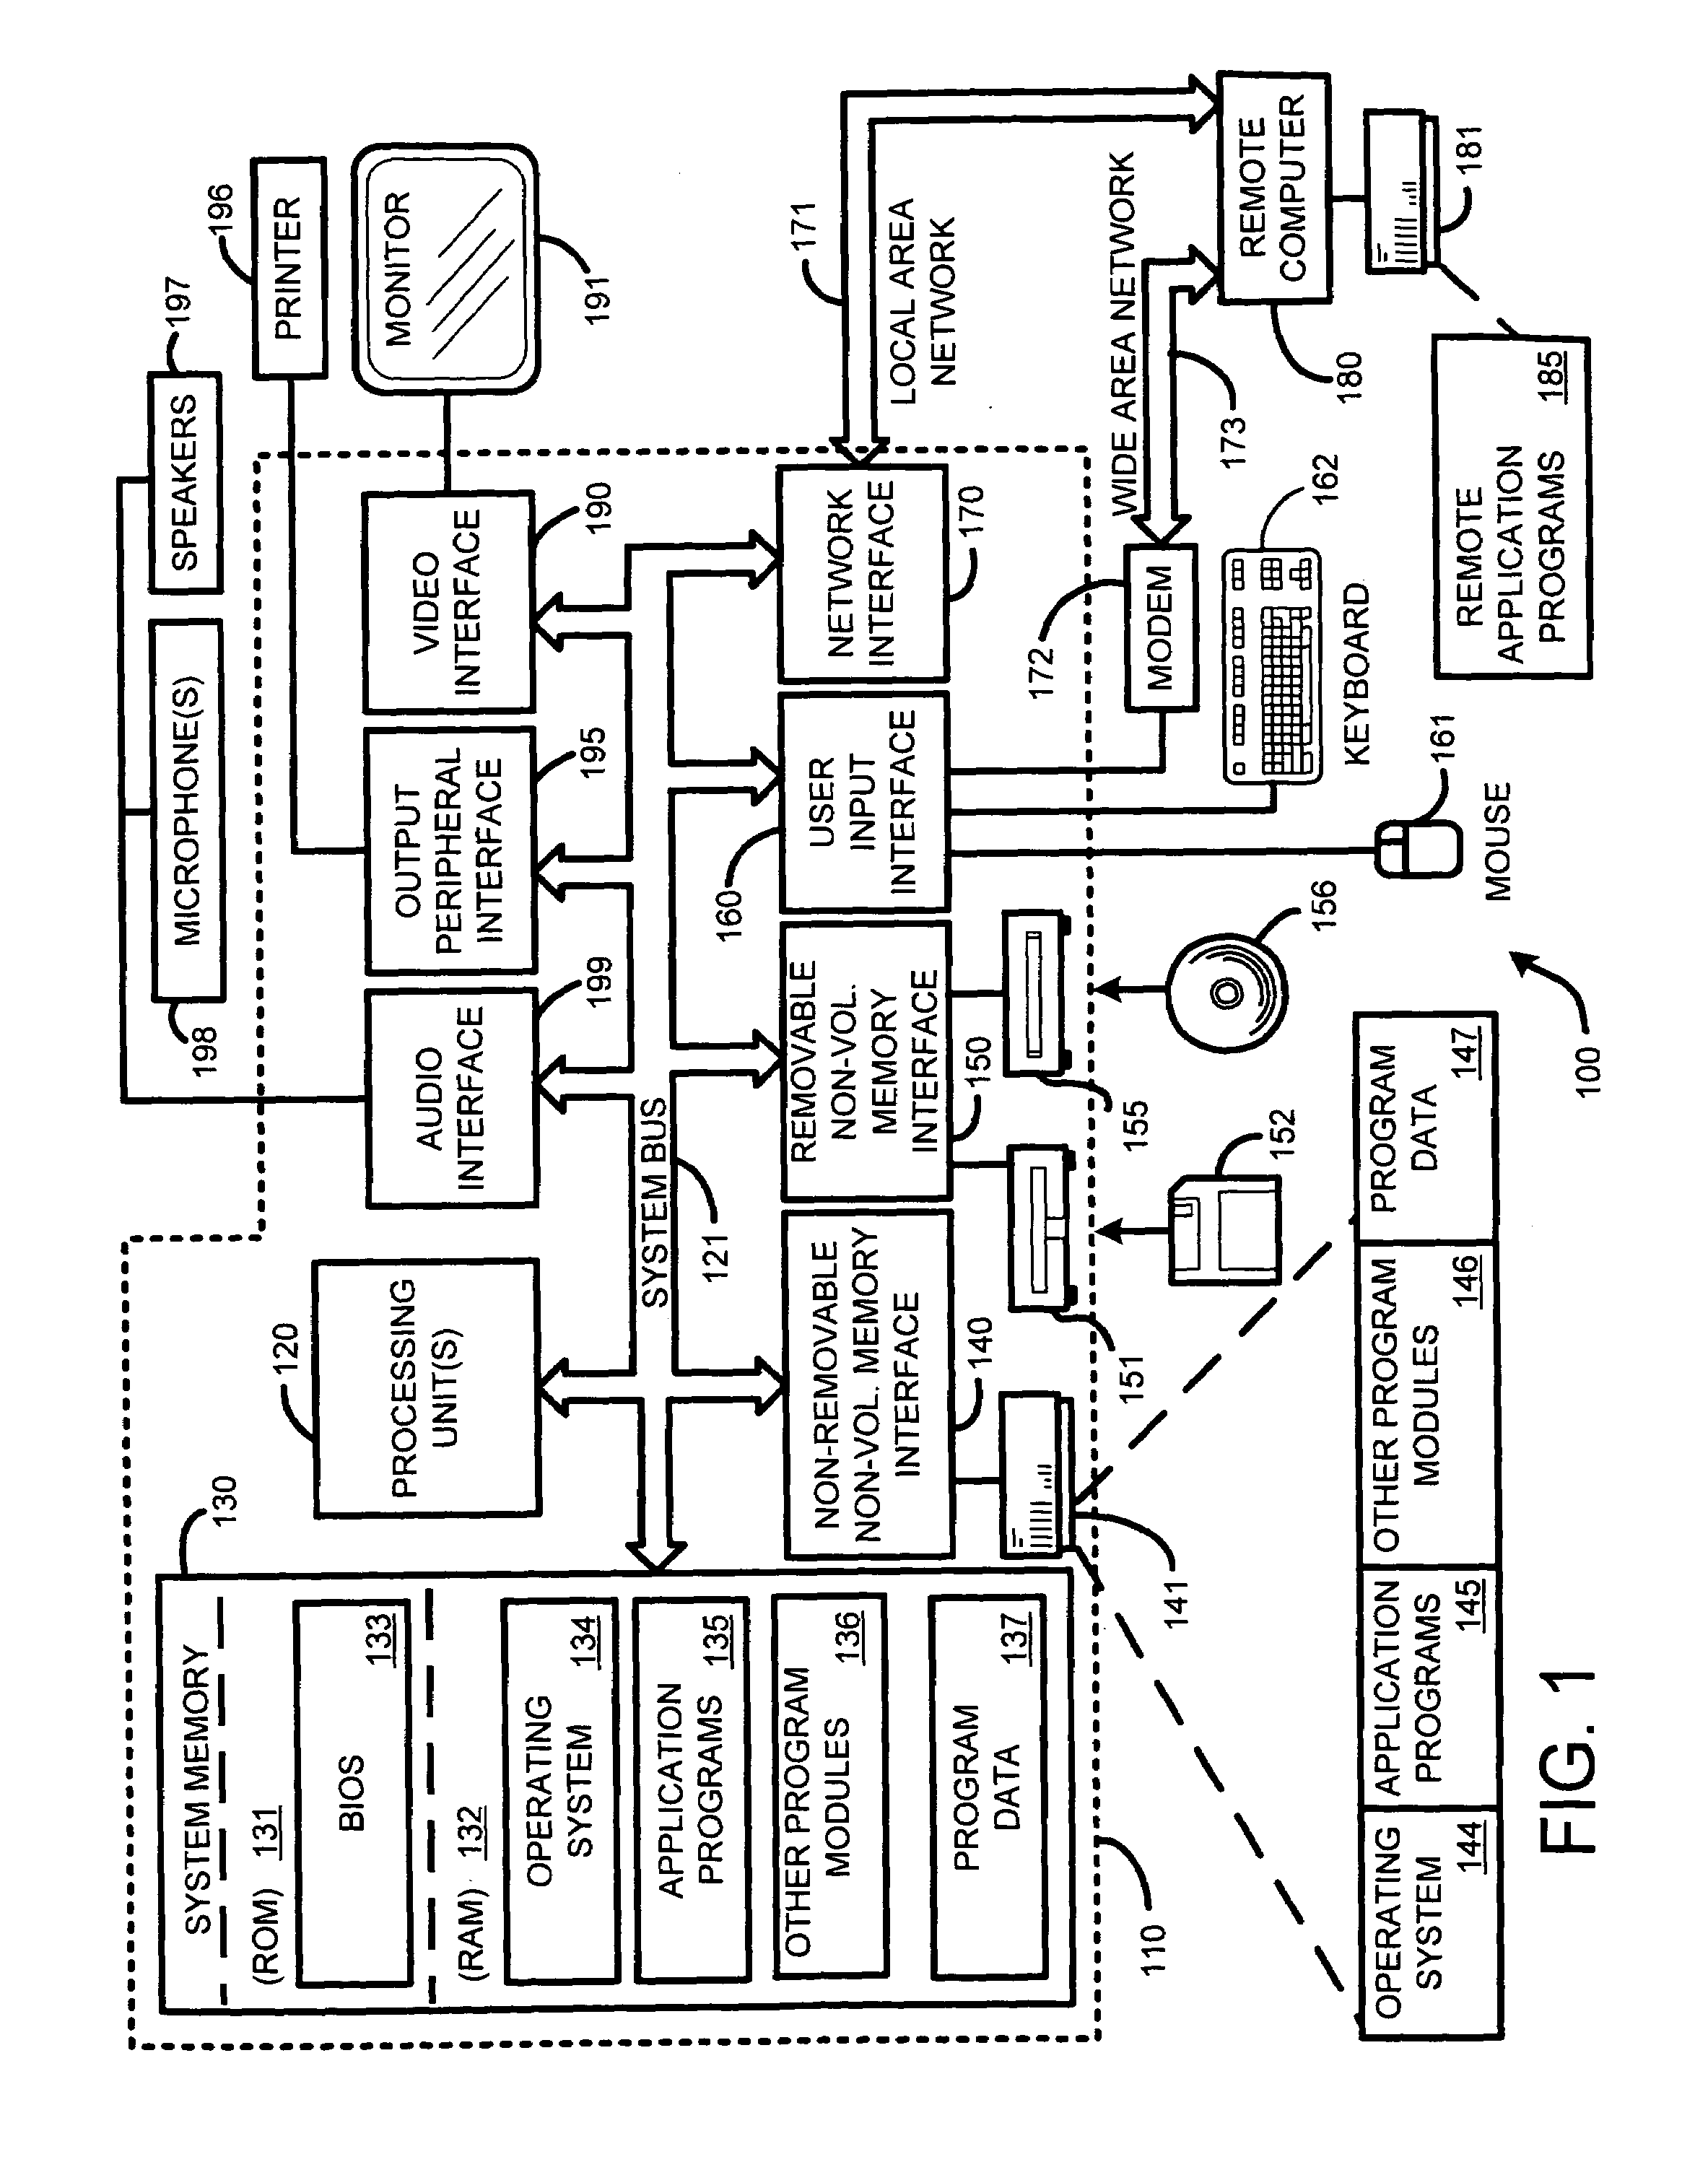 System and method for very low frame rate video streaming for face-to-face video conferencing